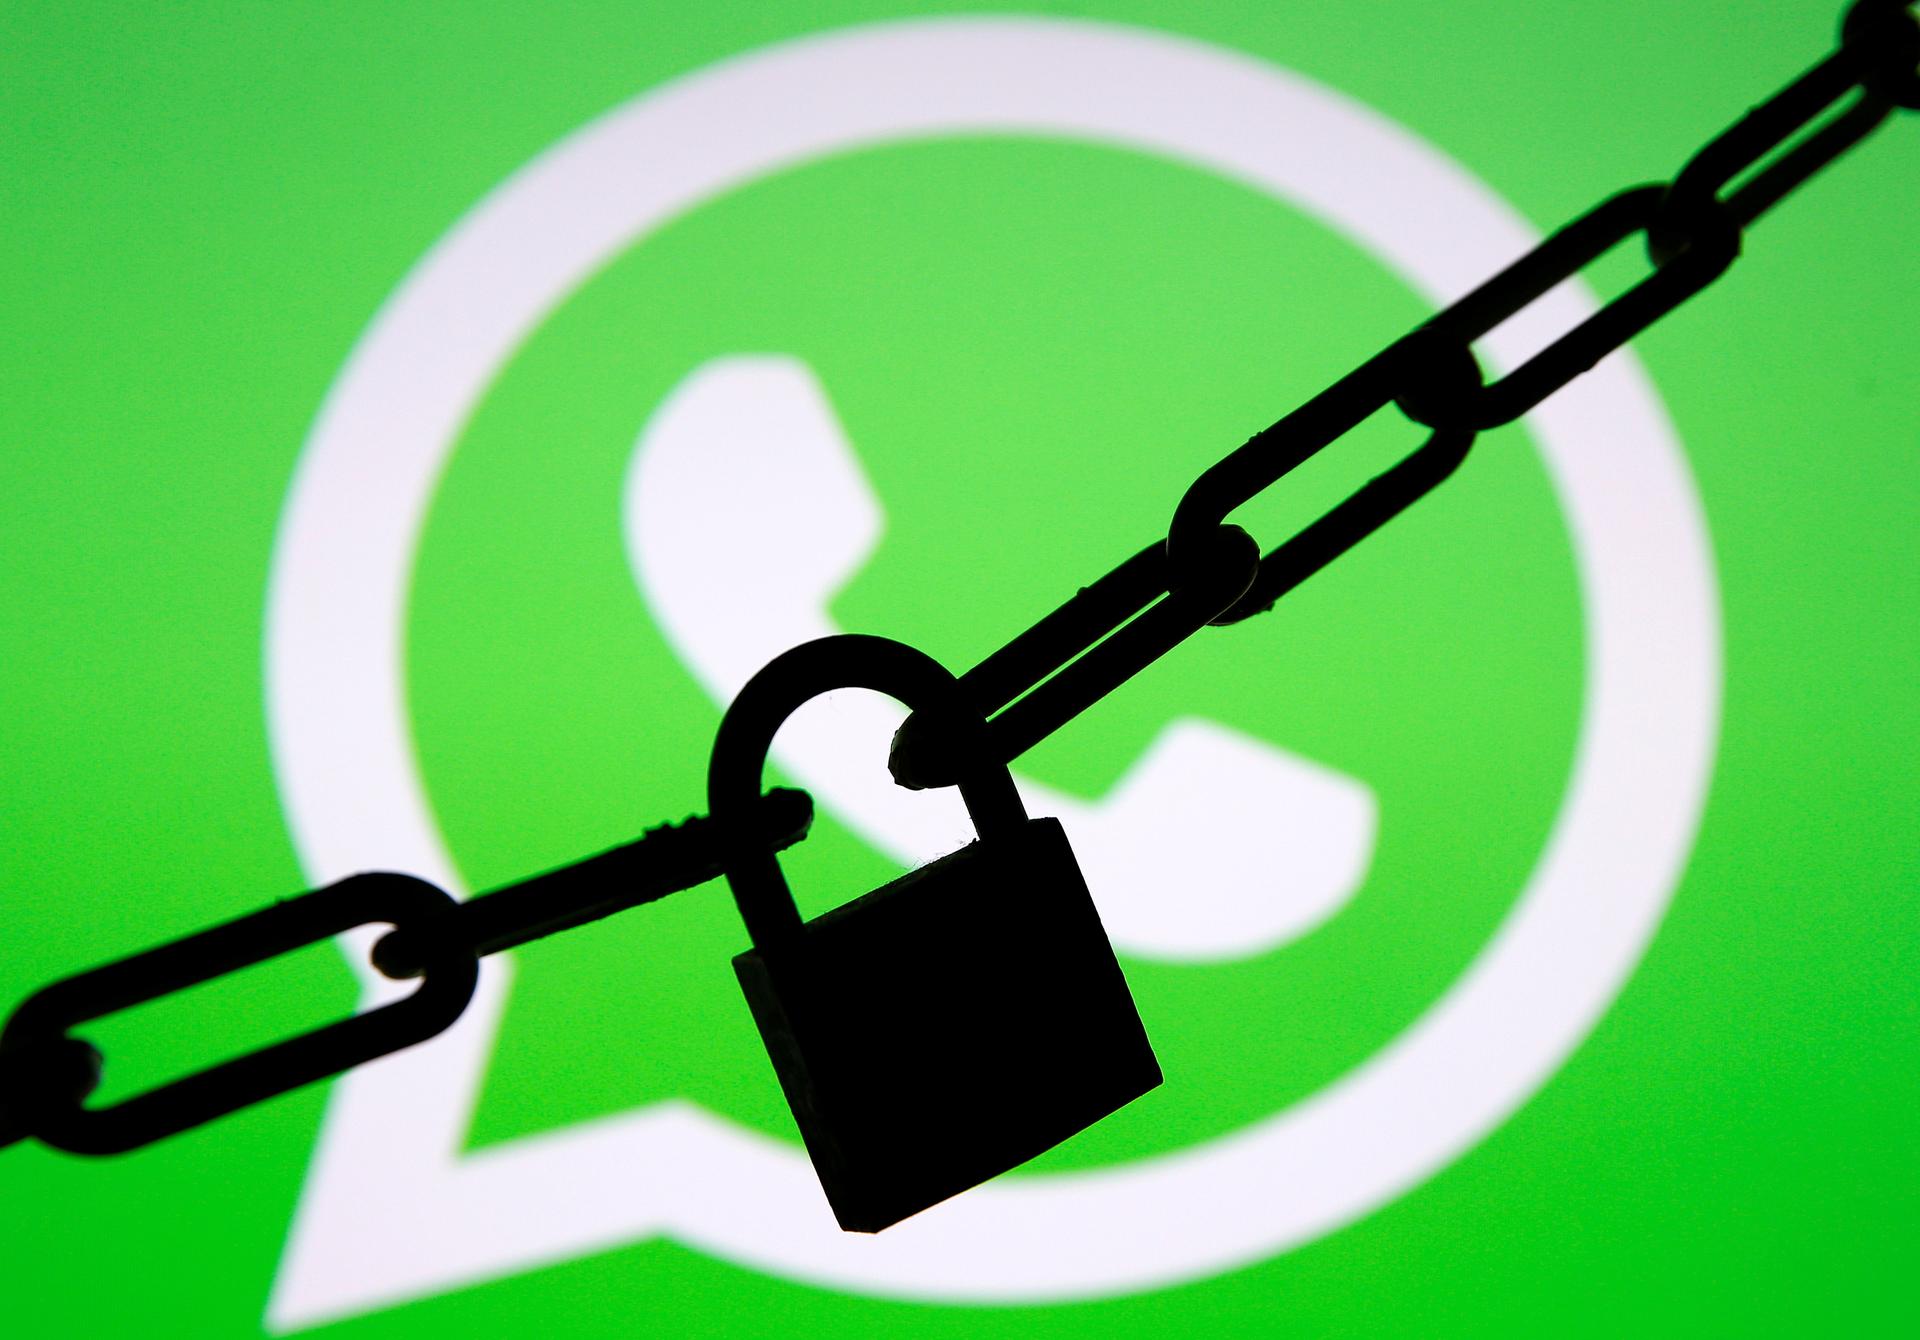 U.N. says officials barred from using WhatsApp since June 2019 over security